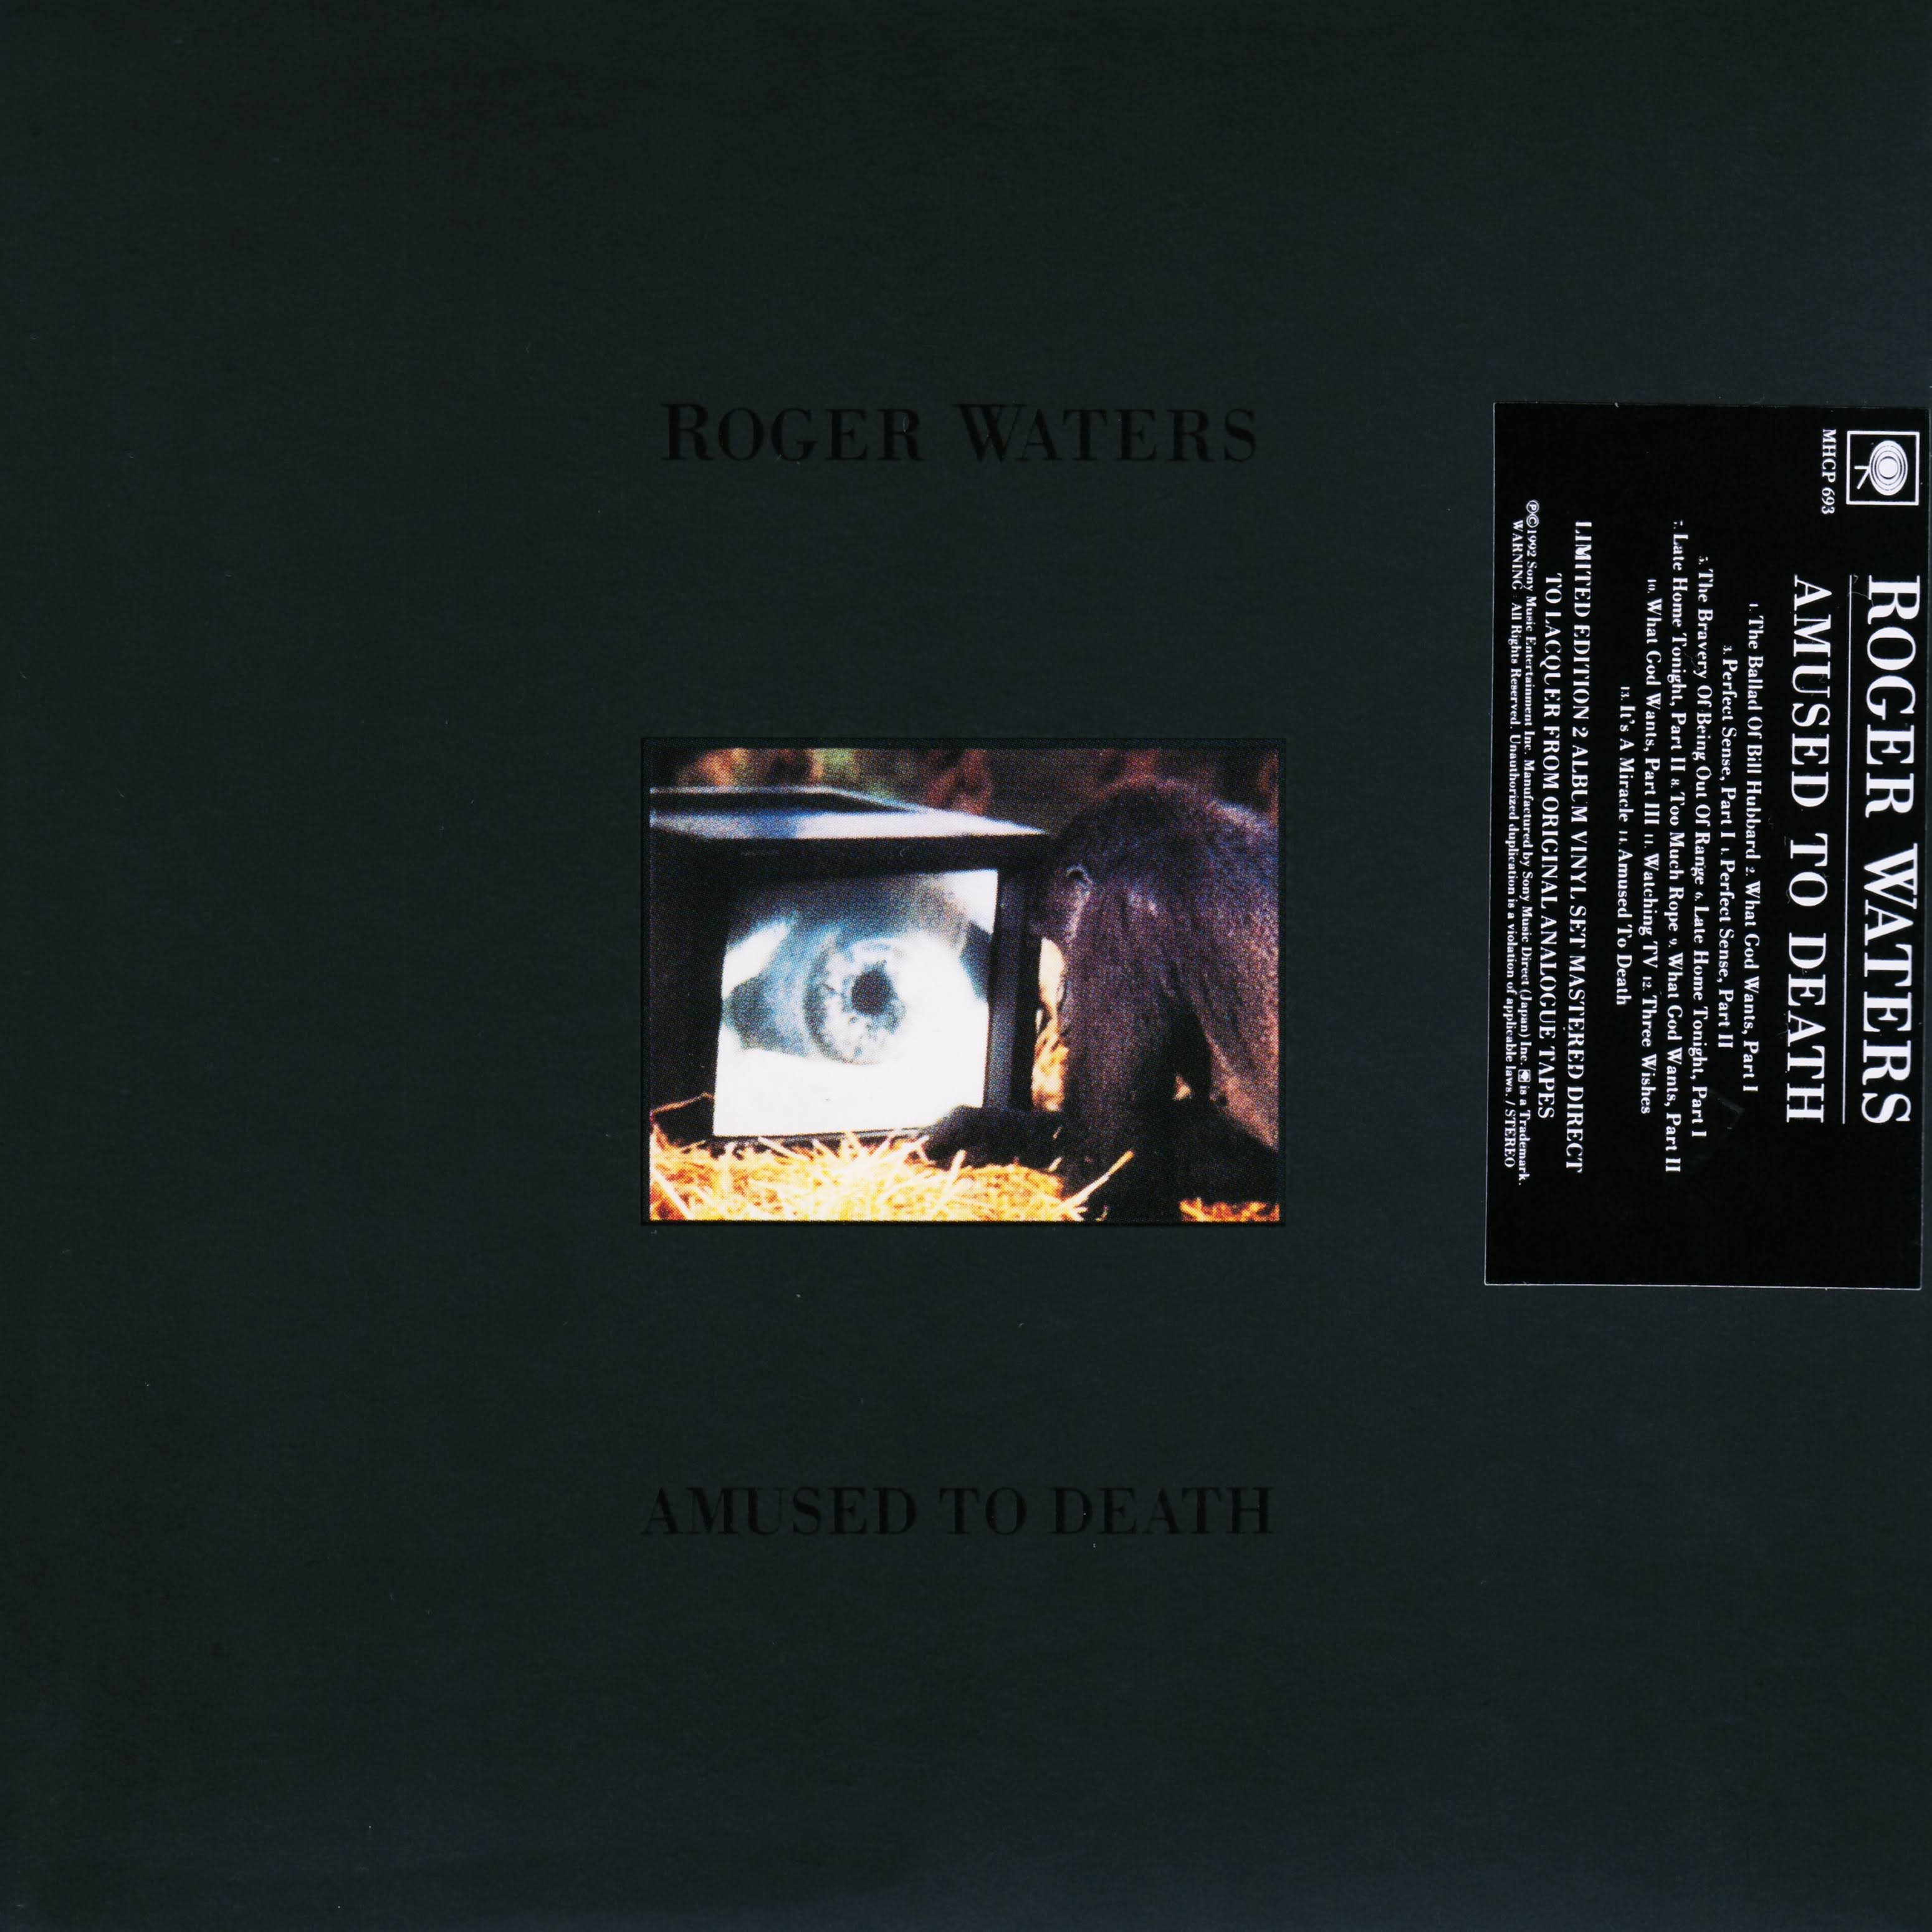 Amused to death. Роджер Уотерс 1992 amused to Death. Waters amused to Death обложка. Roger Waters - amused to Death 1992 [br]. R Waters amused to Death 2lp Columbia.